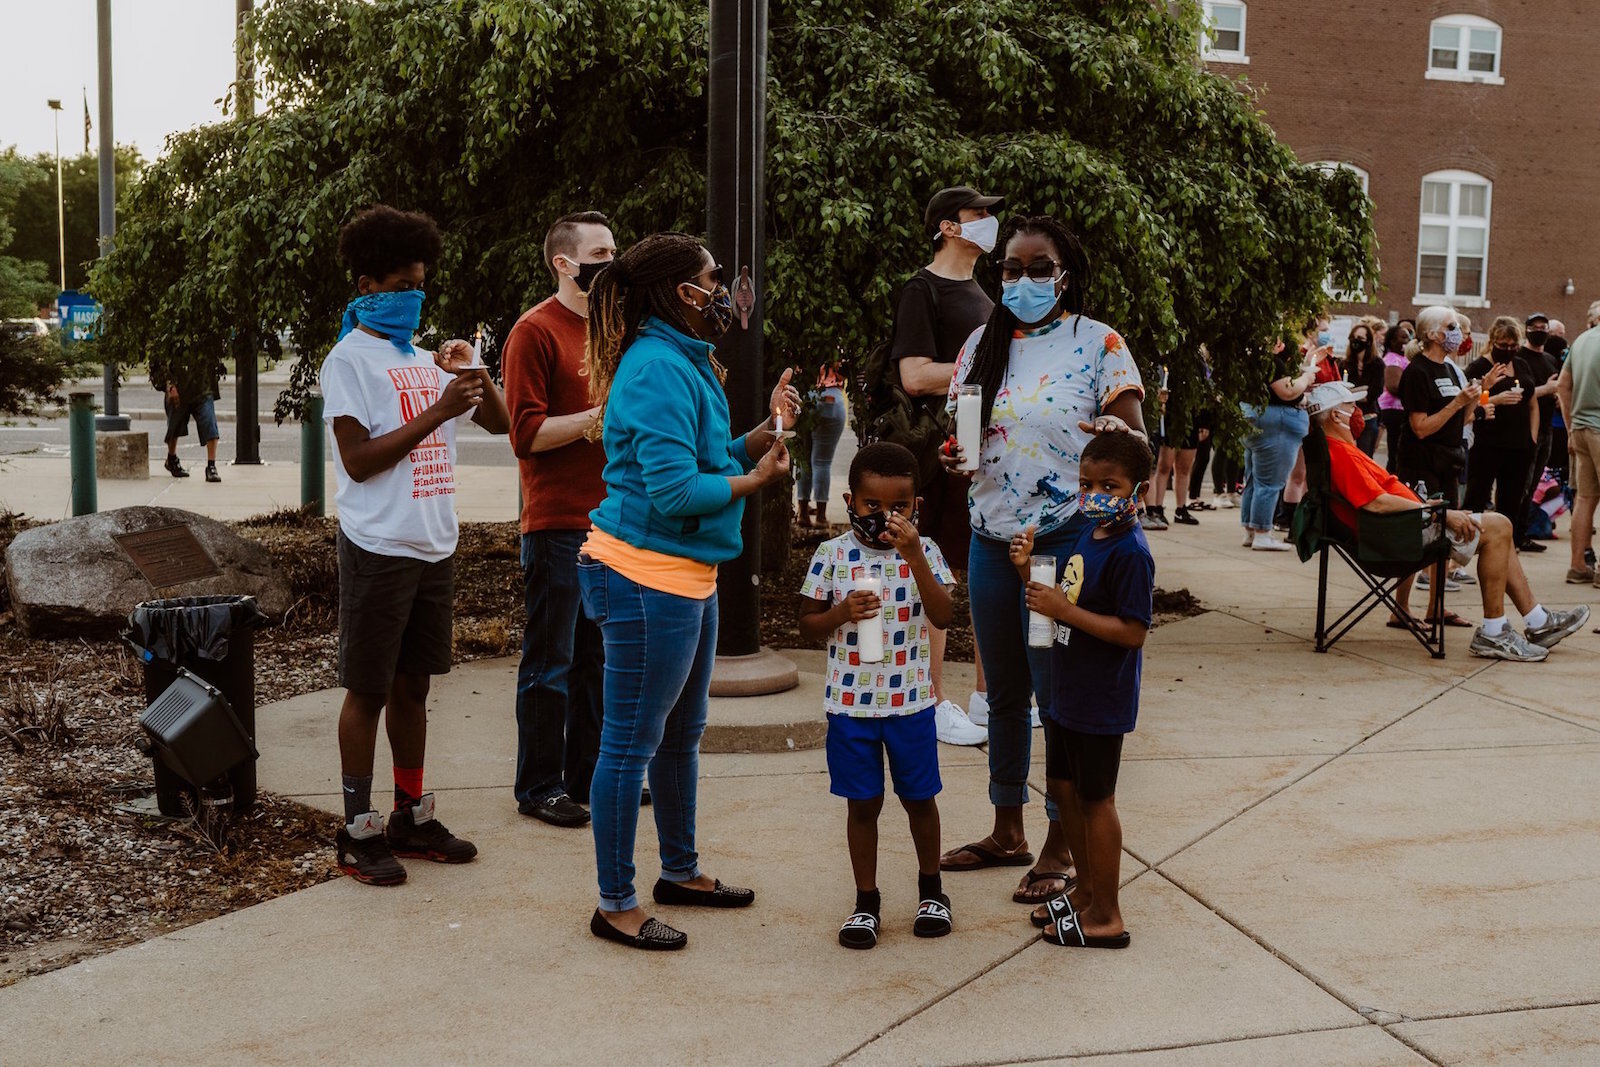 A candlelight vigil on June 4 in downtown Battle Creek was the beginning of the community’s opportunity to come together and express their grief and outrage over the death of George Floyd.